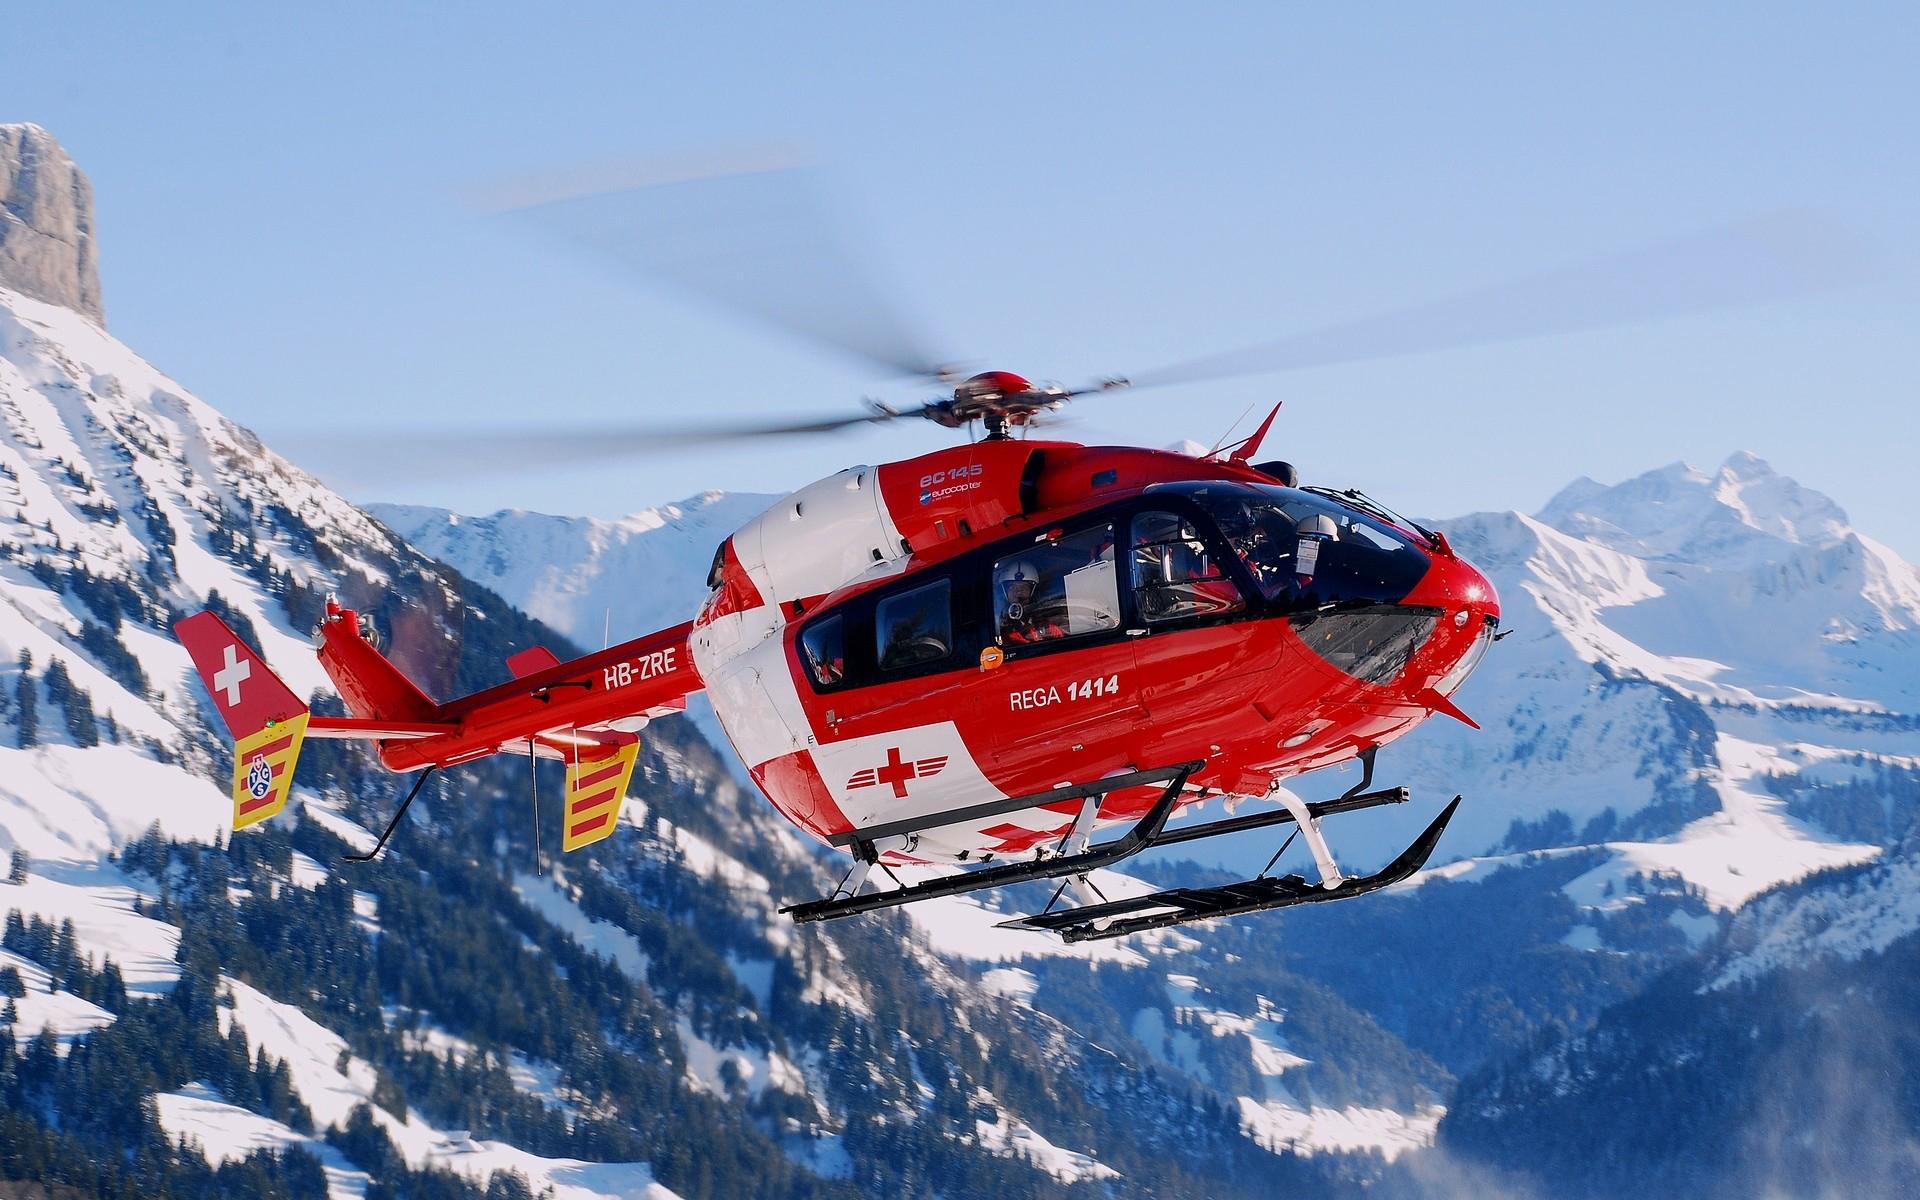 Download wallpaper 1920x1200 rescue helicopter, sky